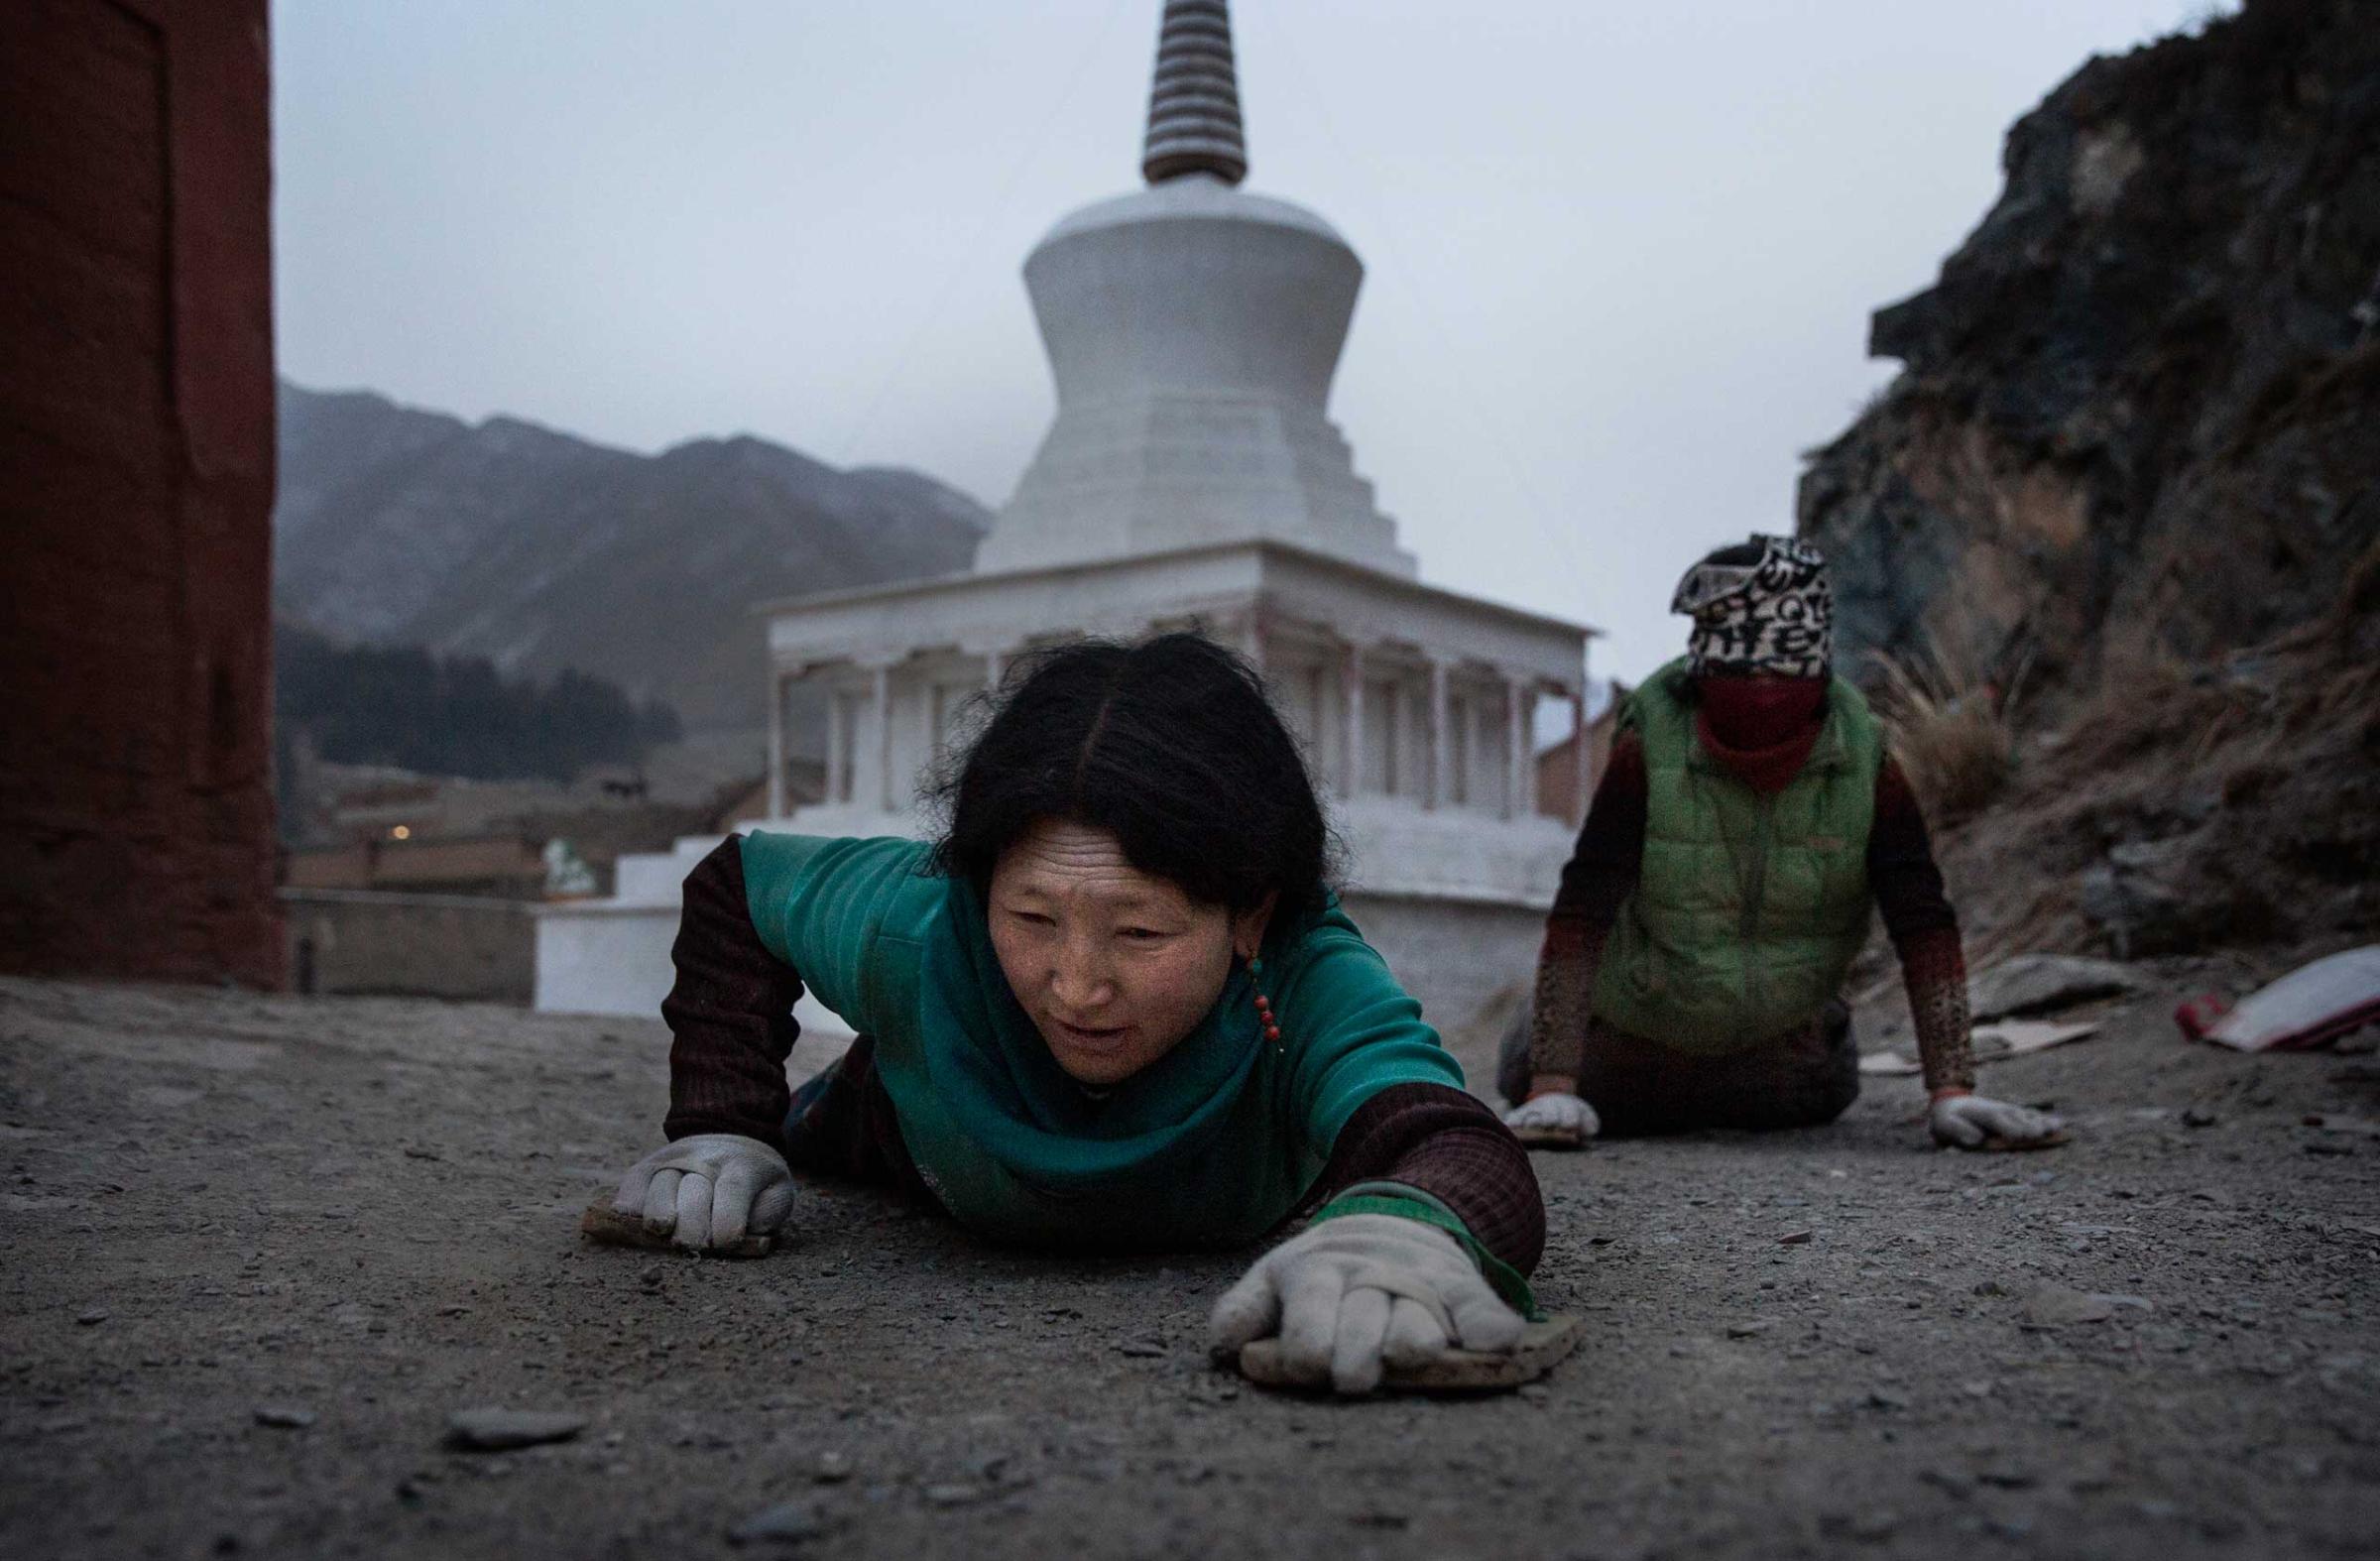 Tibetan Buddhist women prostrate during Monlam or the Great Prayer rituals at the Labrang Monastery, Xiahe County, Amdo, Tibetan Autonomous Prefecture, Gansu Province, China., March 5, 2015.